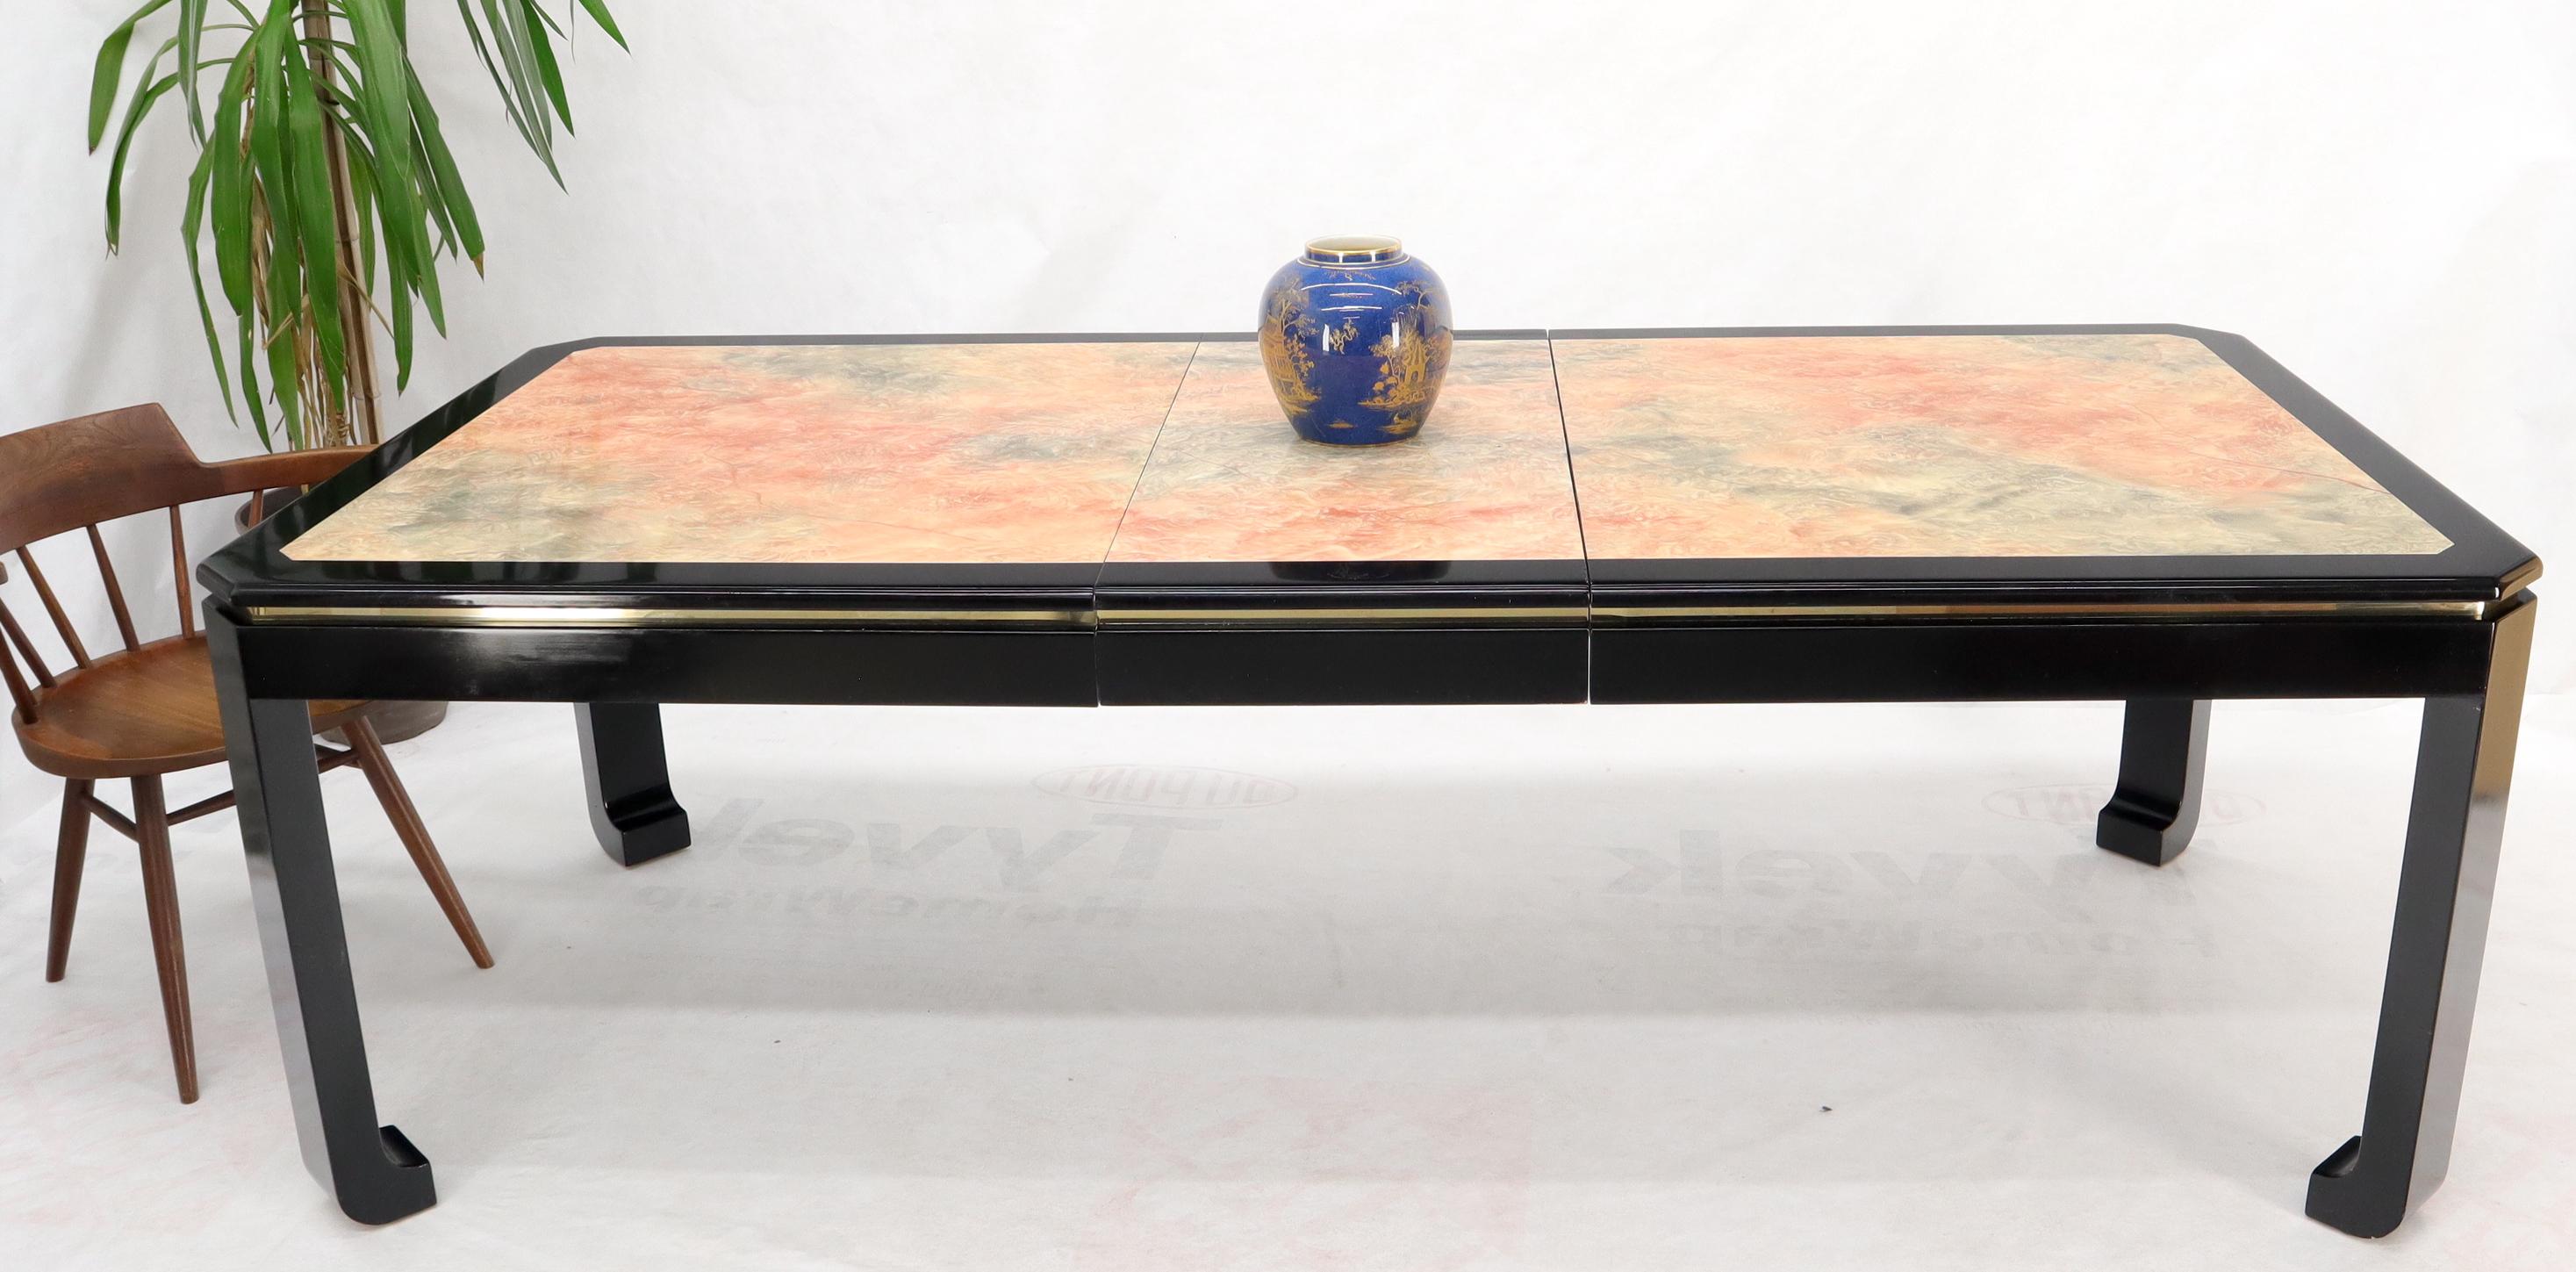 Black Lacquer Faux Stone Marble Finish Dining Table with Leave Extension Board In Good Condition For Sale In Rockaway, NJ